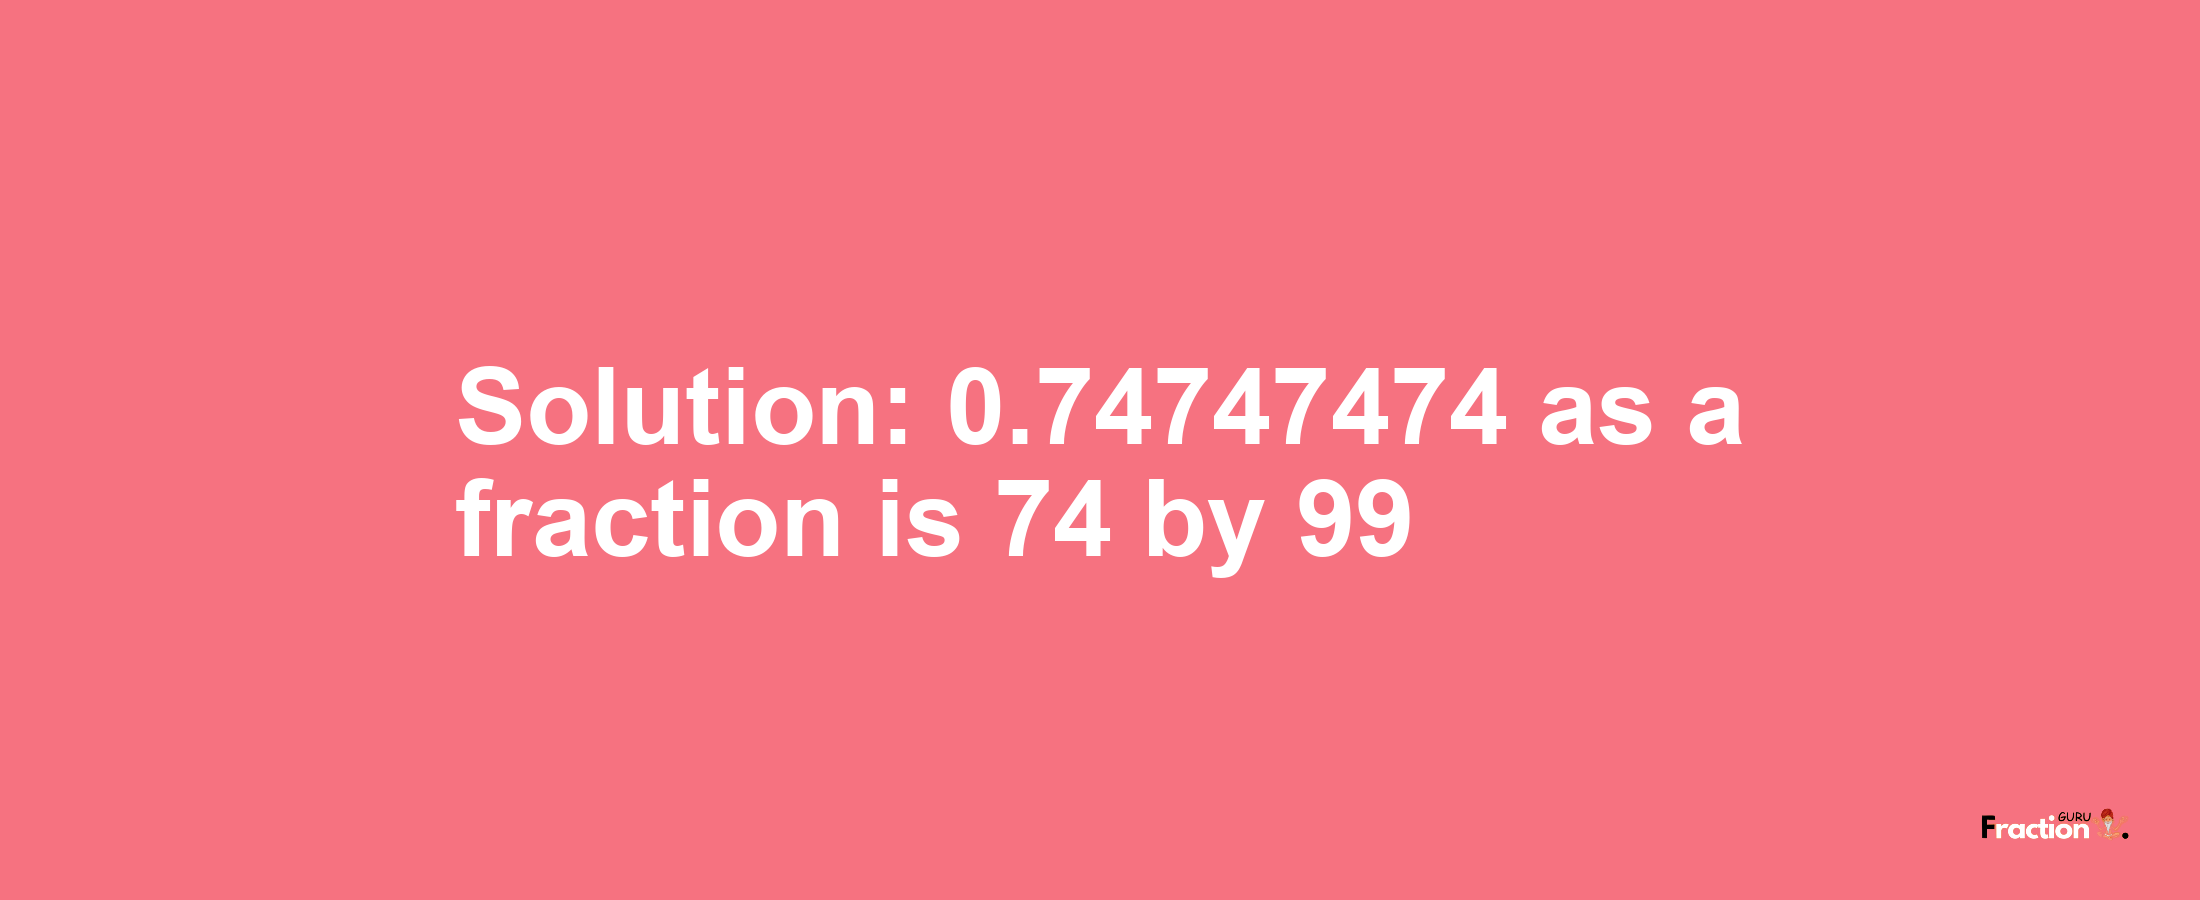 Solution:0.74747474 as a fraction is 74/99